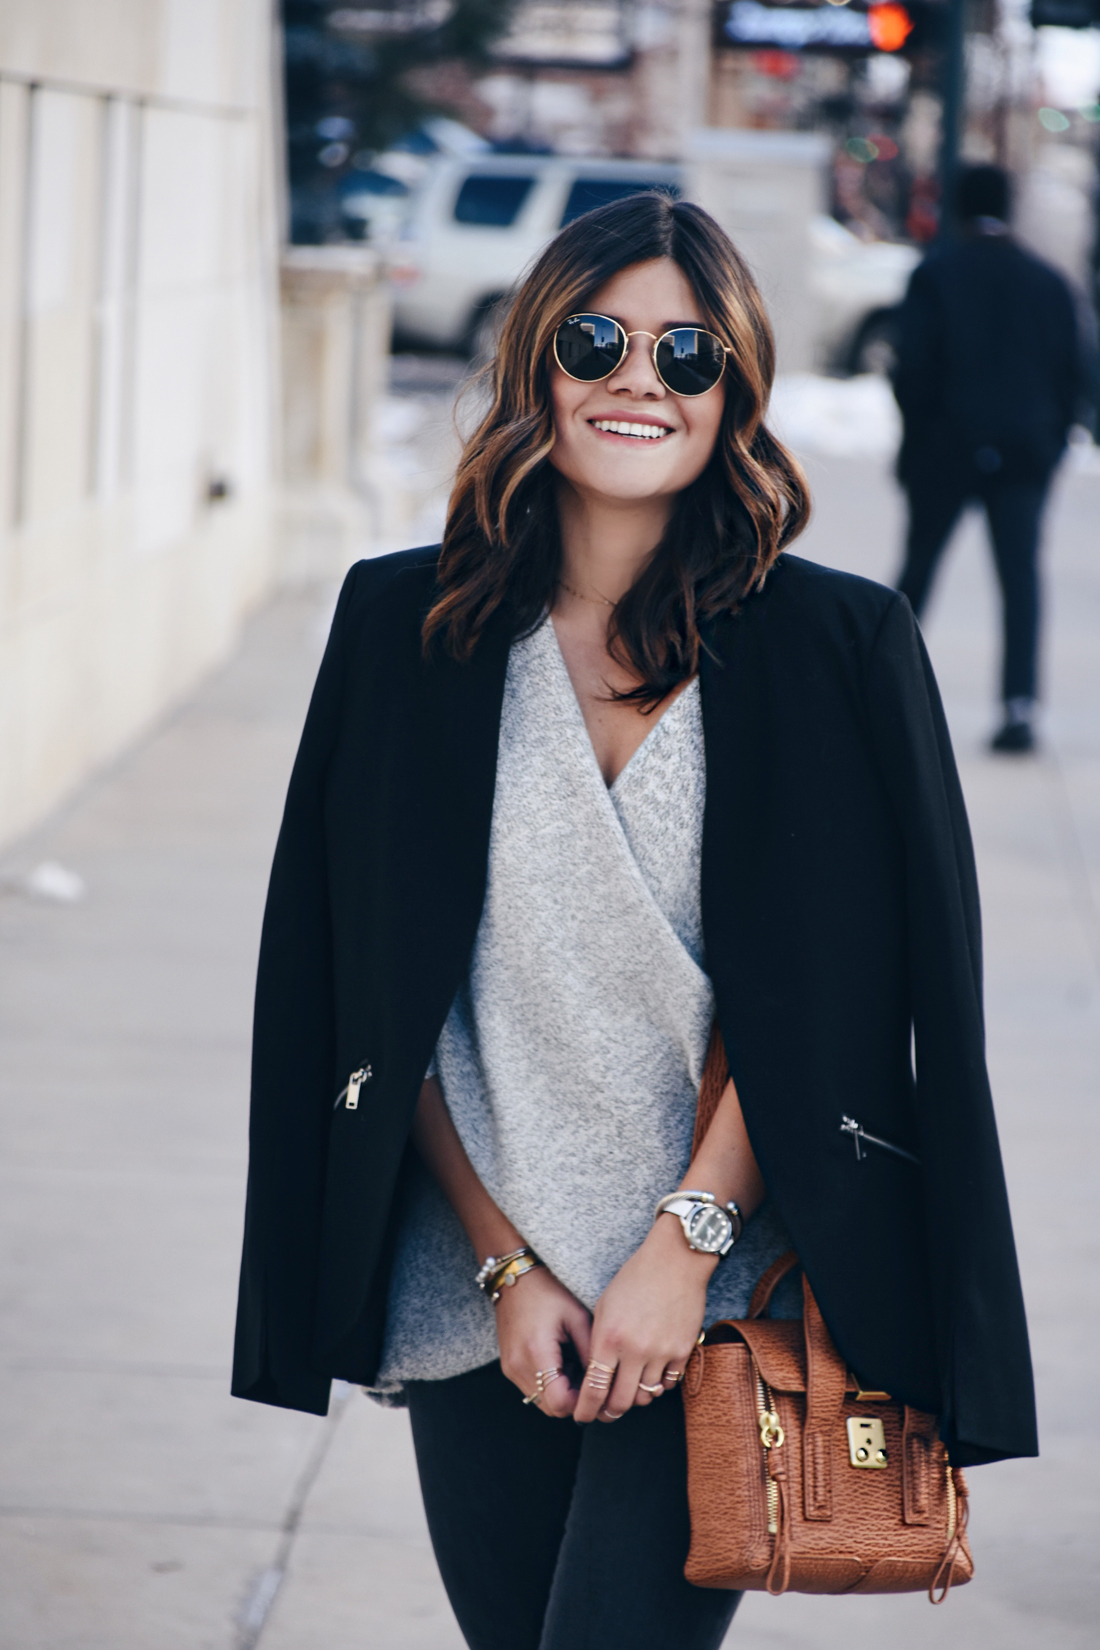 Carolina Hellal of Chic Talk wearing Madewell jeans, Rayban Sunglasses, 3.1 Phillip Lim bag, Steve Madden pumps, and Chicwish cross front sweater